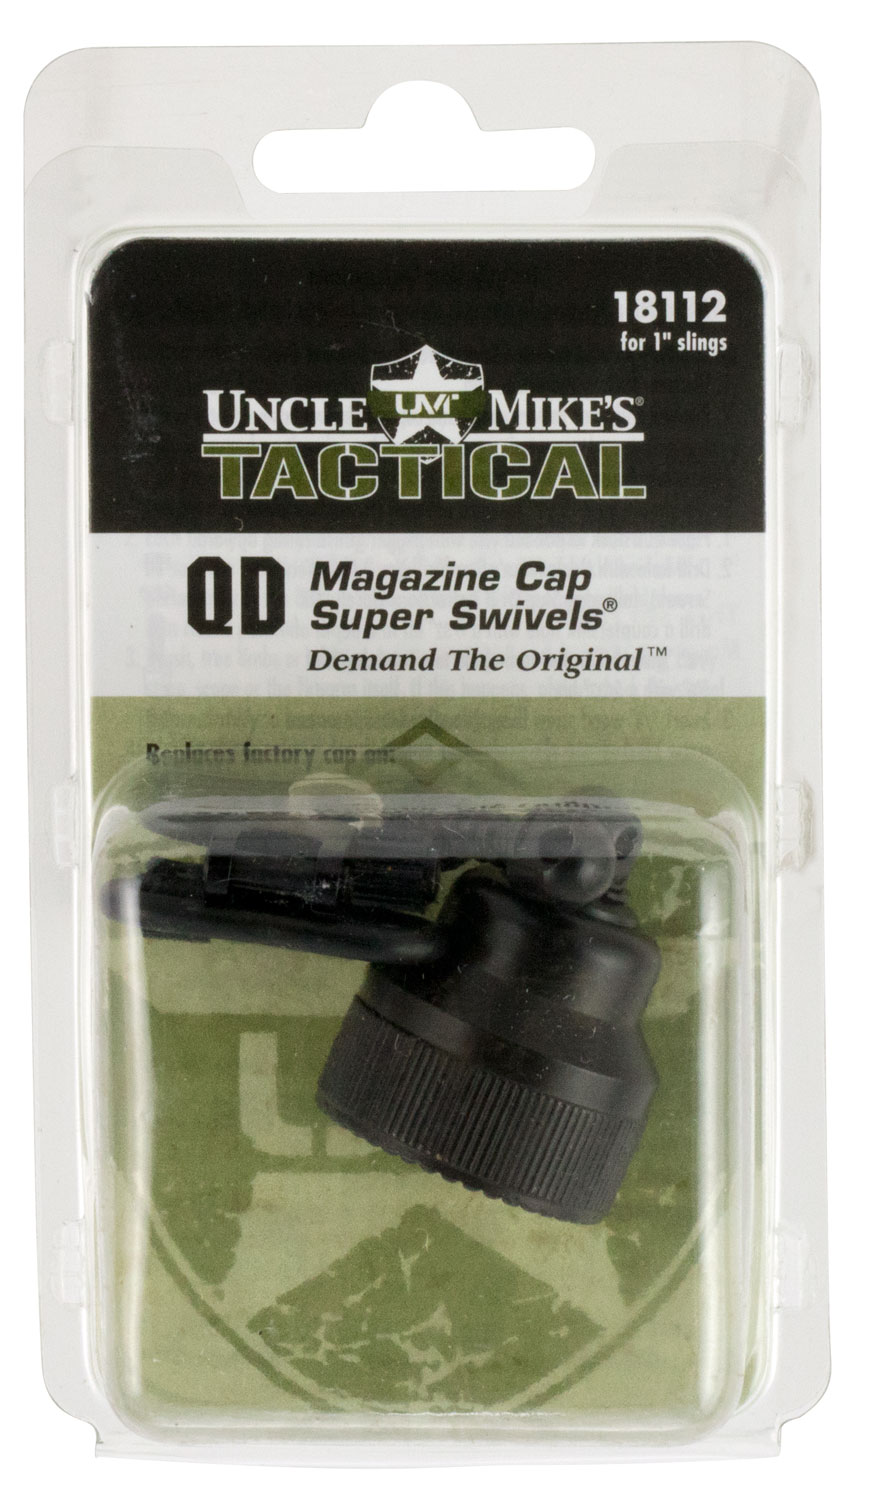 Uncle Mikes 18112 Mag Cap Swivel Set made of Steel with Blued Finish, 1